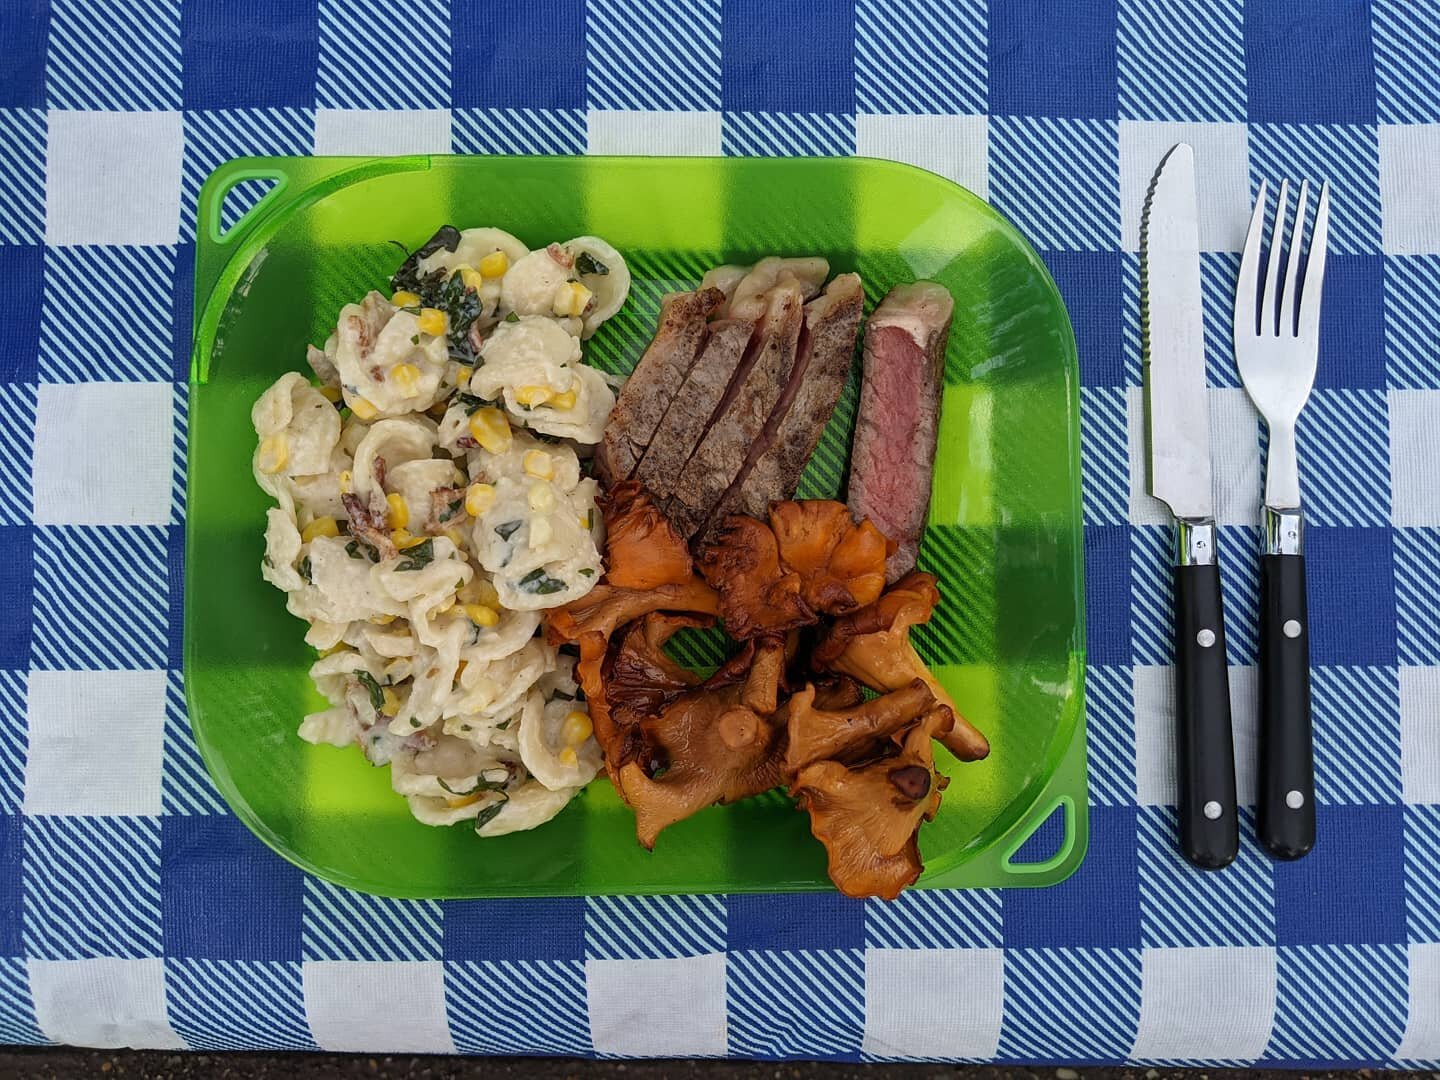 Ribeye with sauteed chanterelles that we foraged on our 7mile hike today and orrichetti with corn and bacon for a side. Who said you can't eat gourmet while camping?! 

#camping #lovistatrail #wildmushrooms #foraging #arkansas #lakeouachita